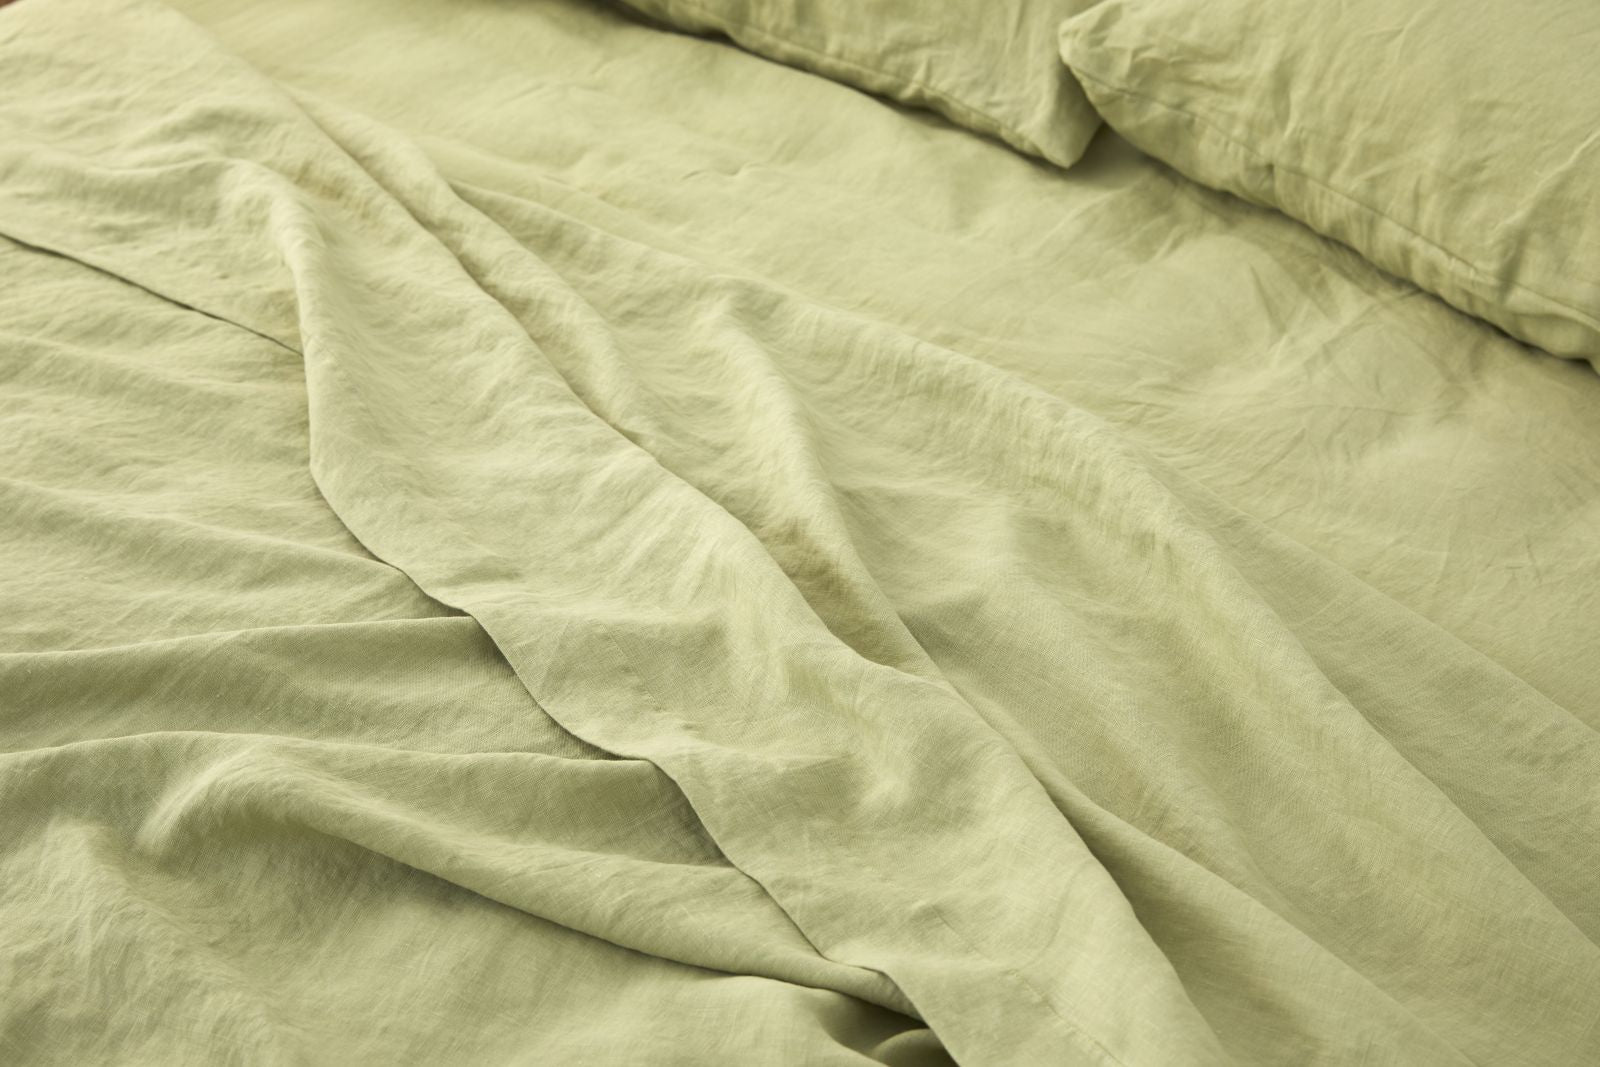 French Flax Linen Sheets in Matcha